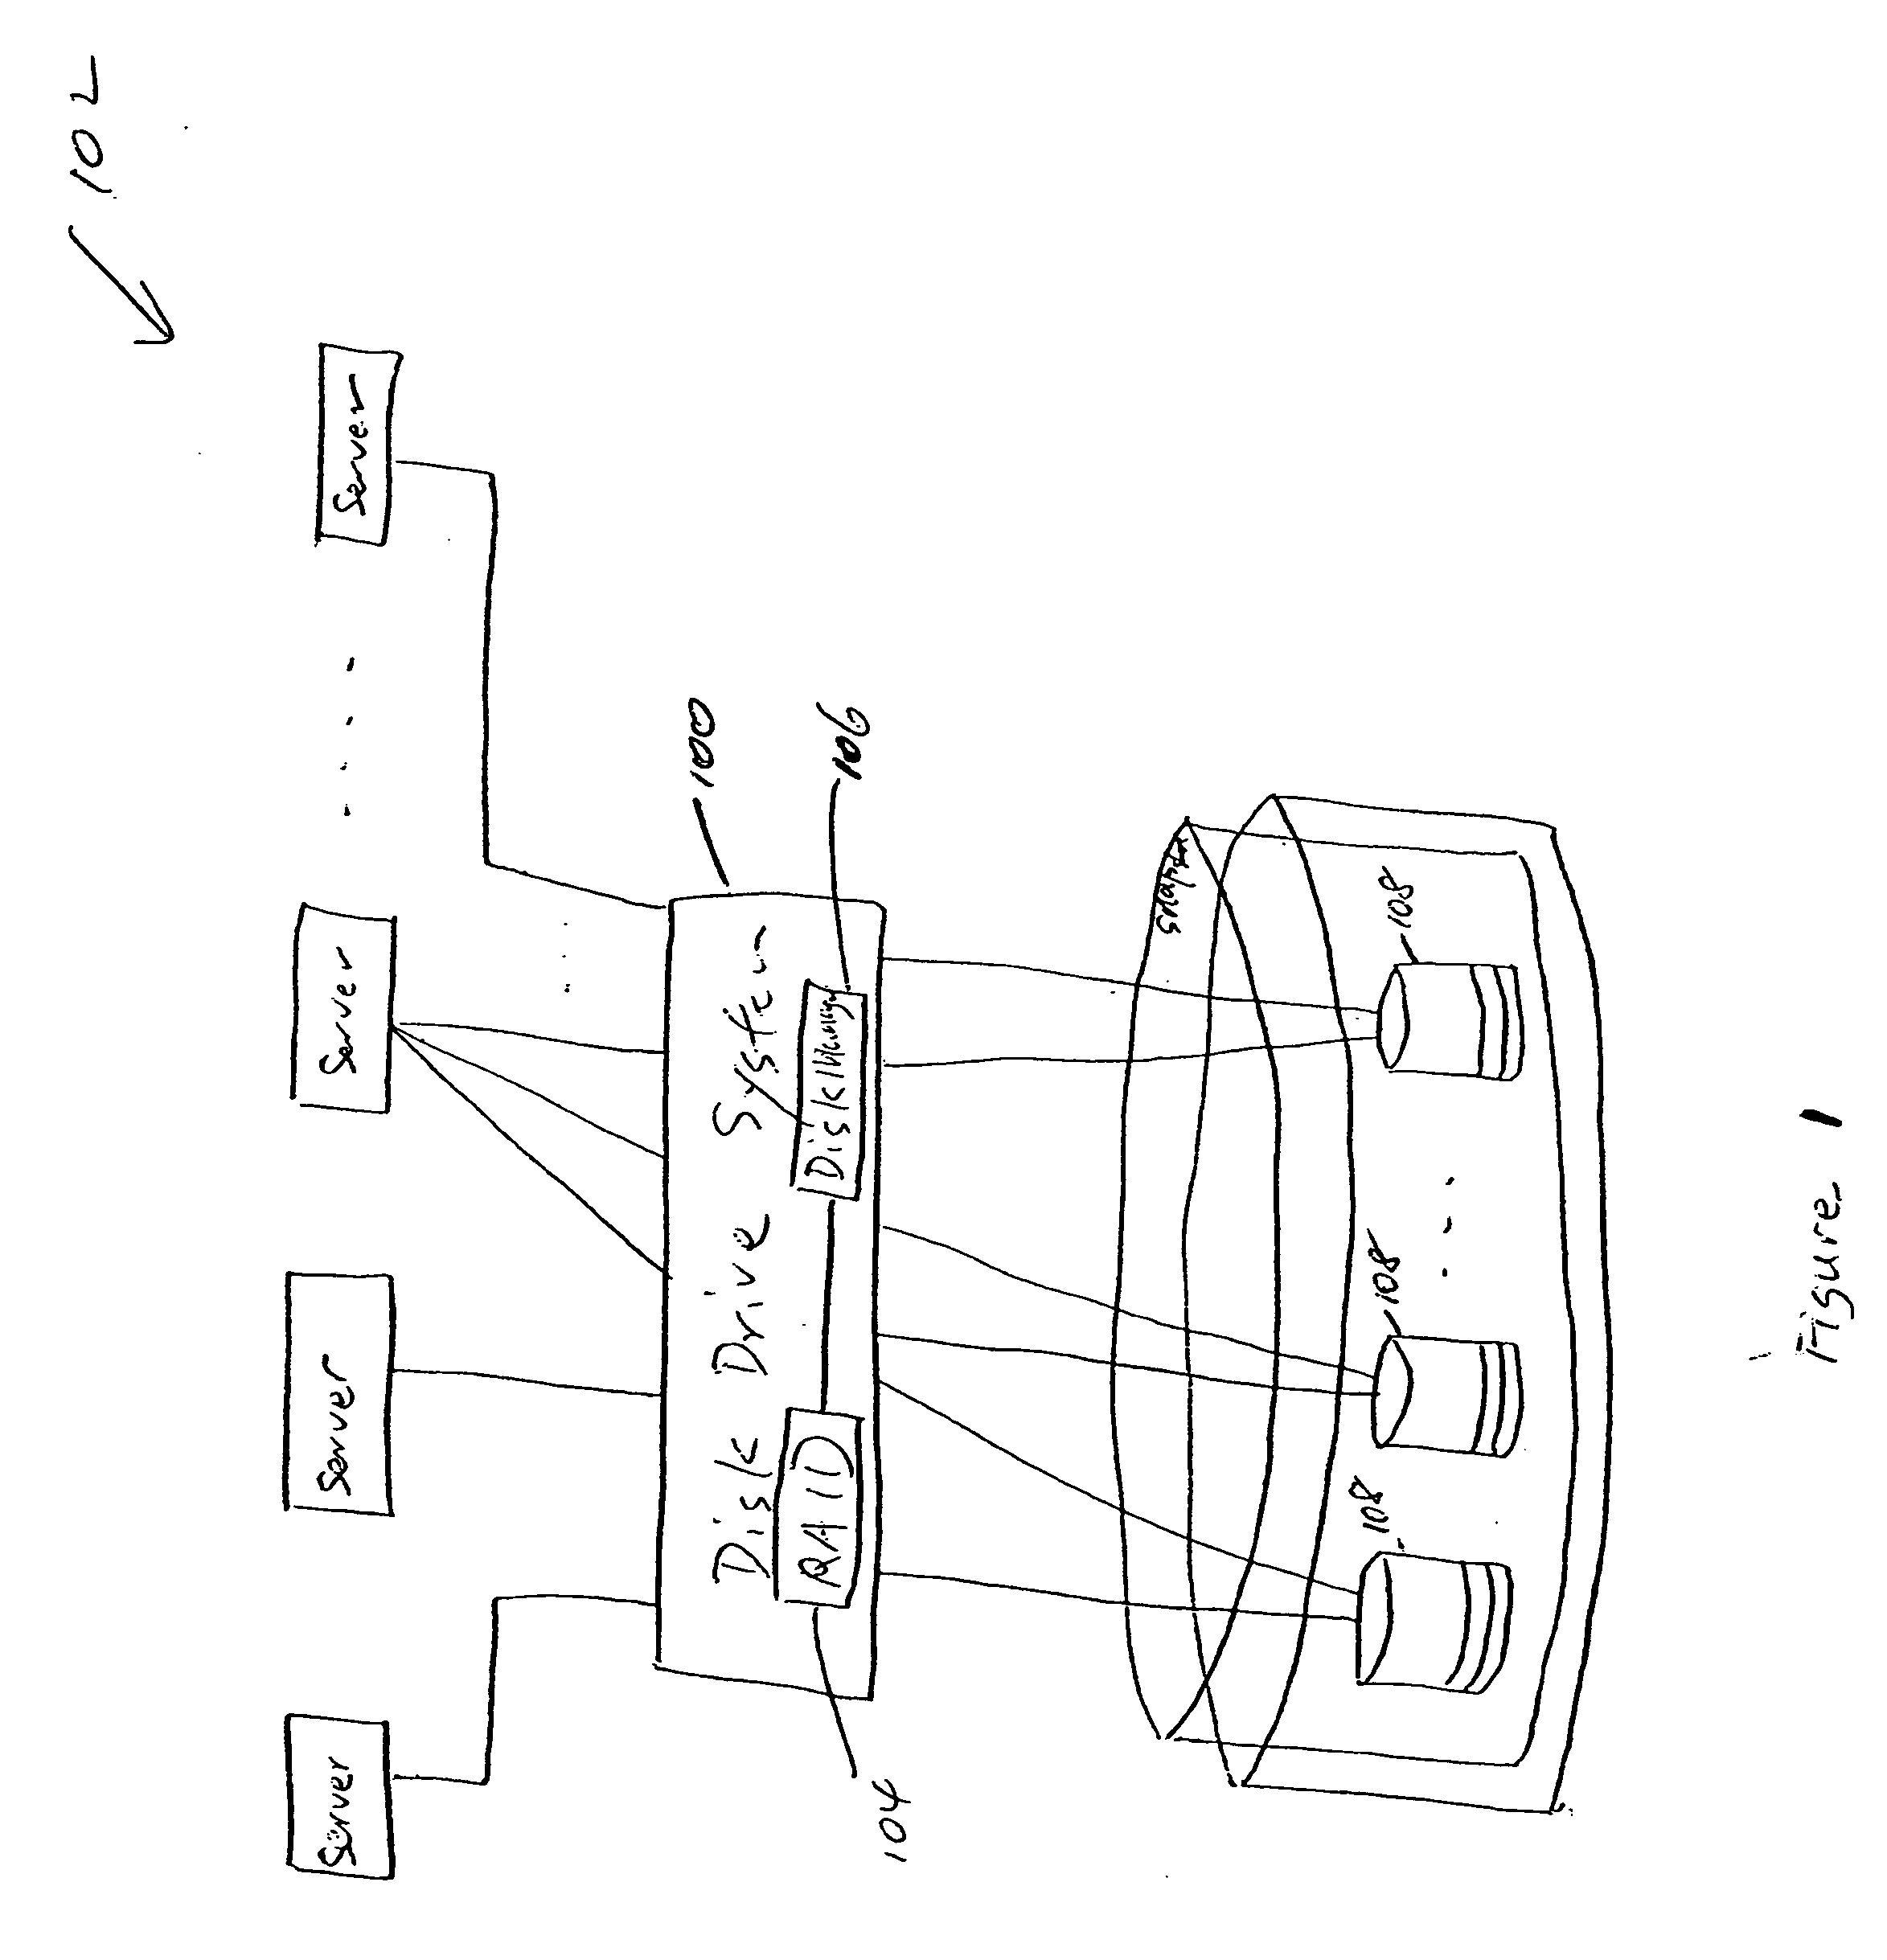 Virtual disk drive system and method